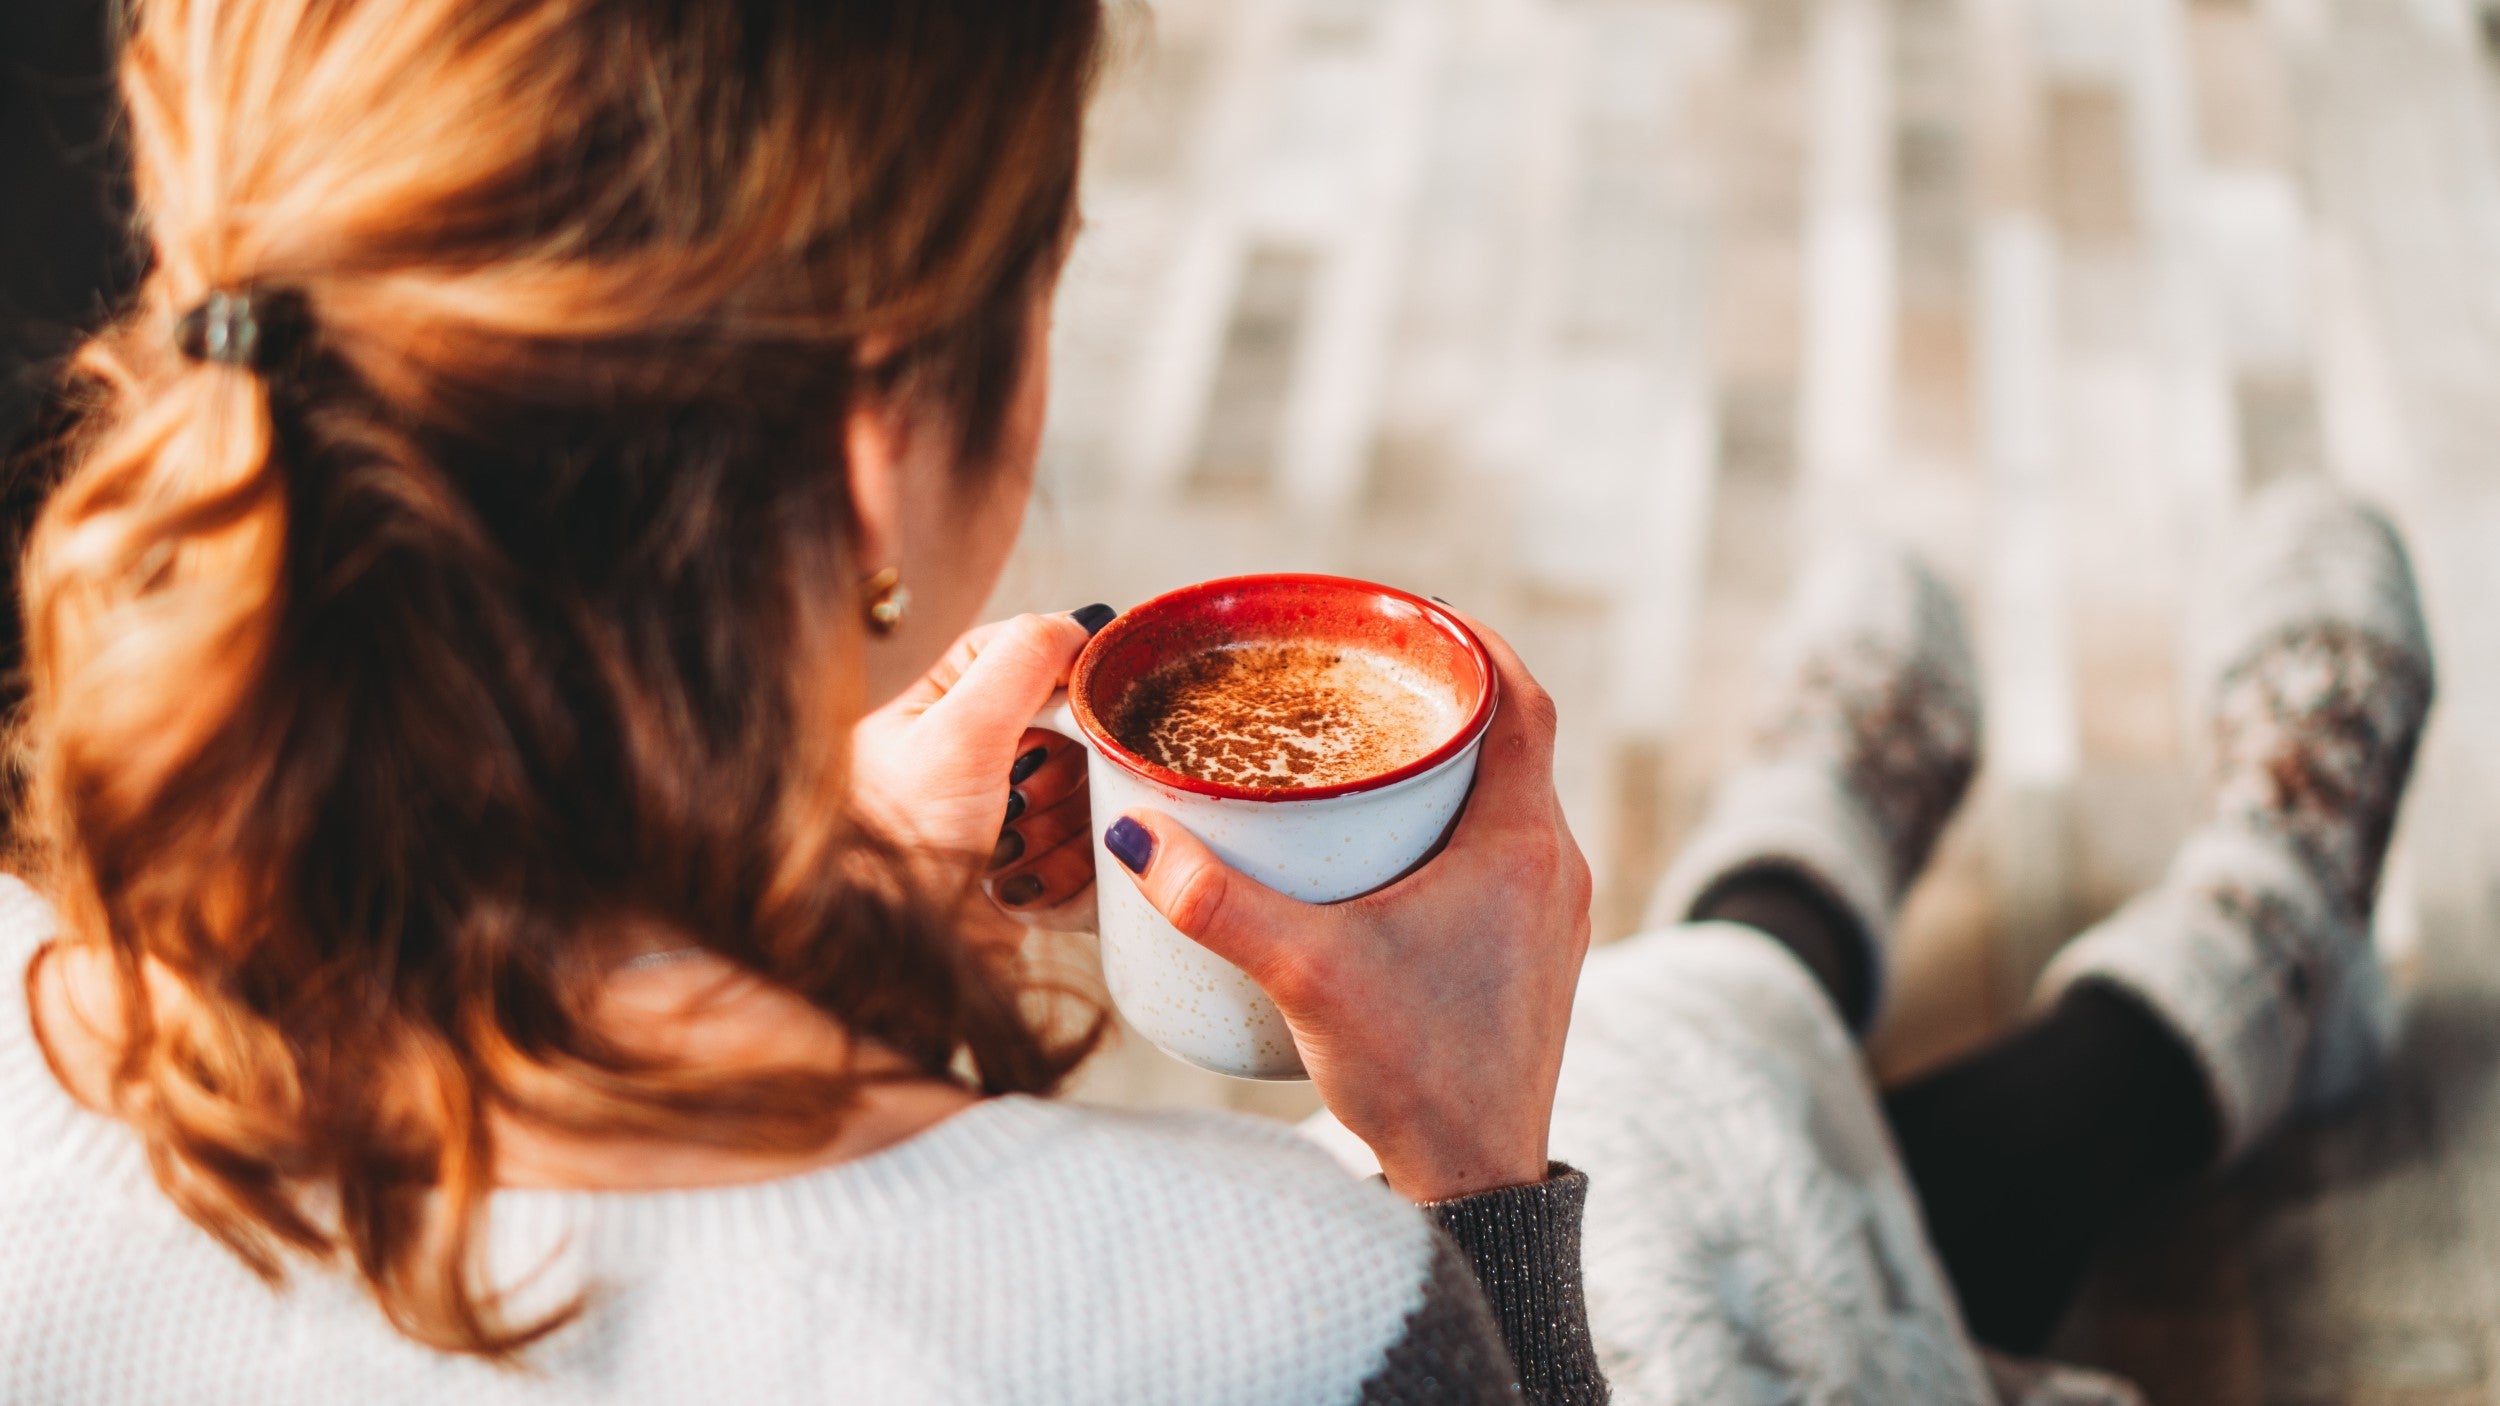 Woman Enjoying Organic Cocoa And Spice Topped Hot Beverage From Terra Powders At Home During Winter